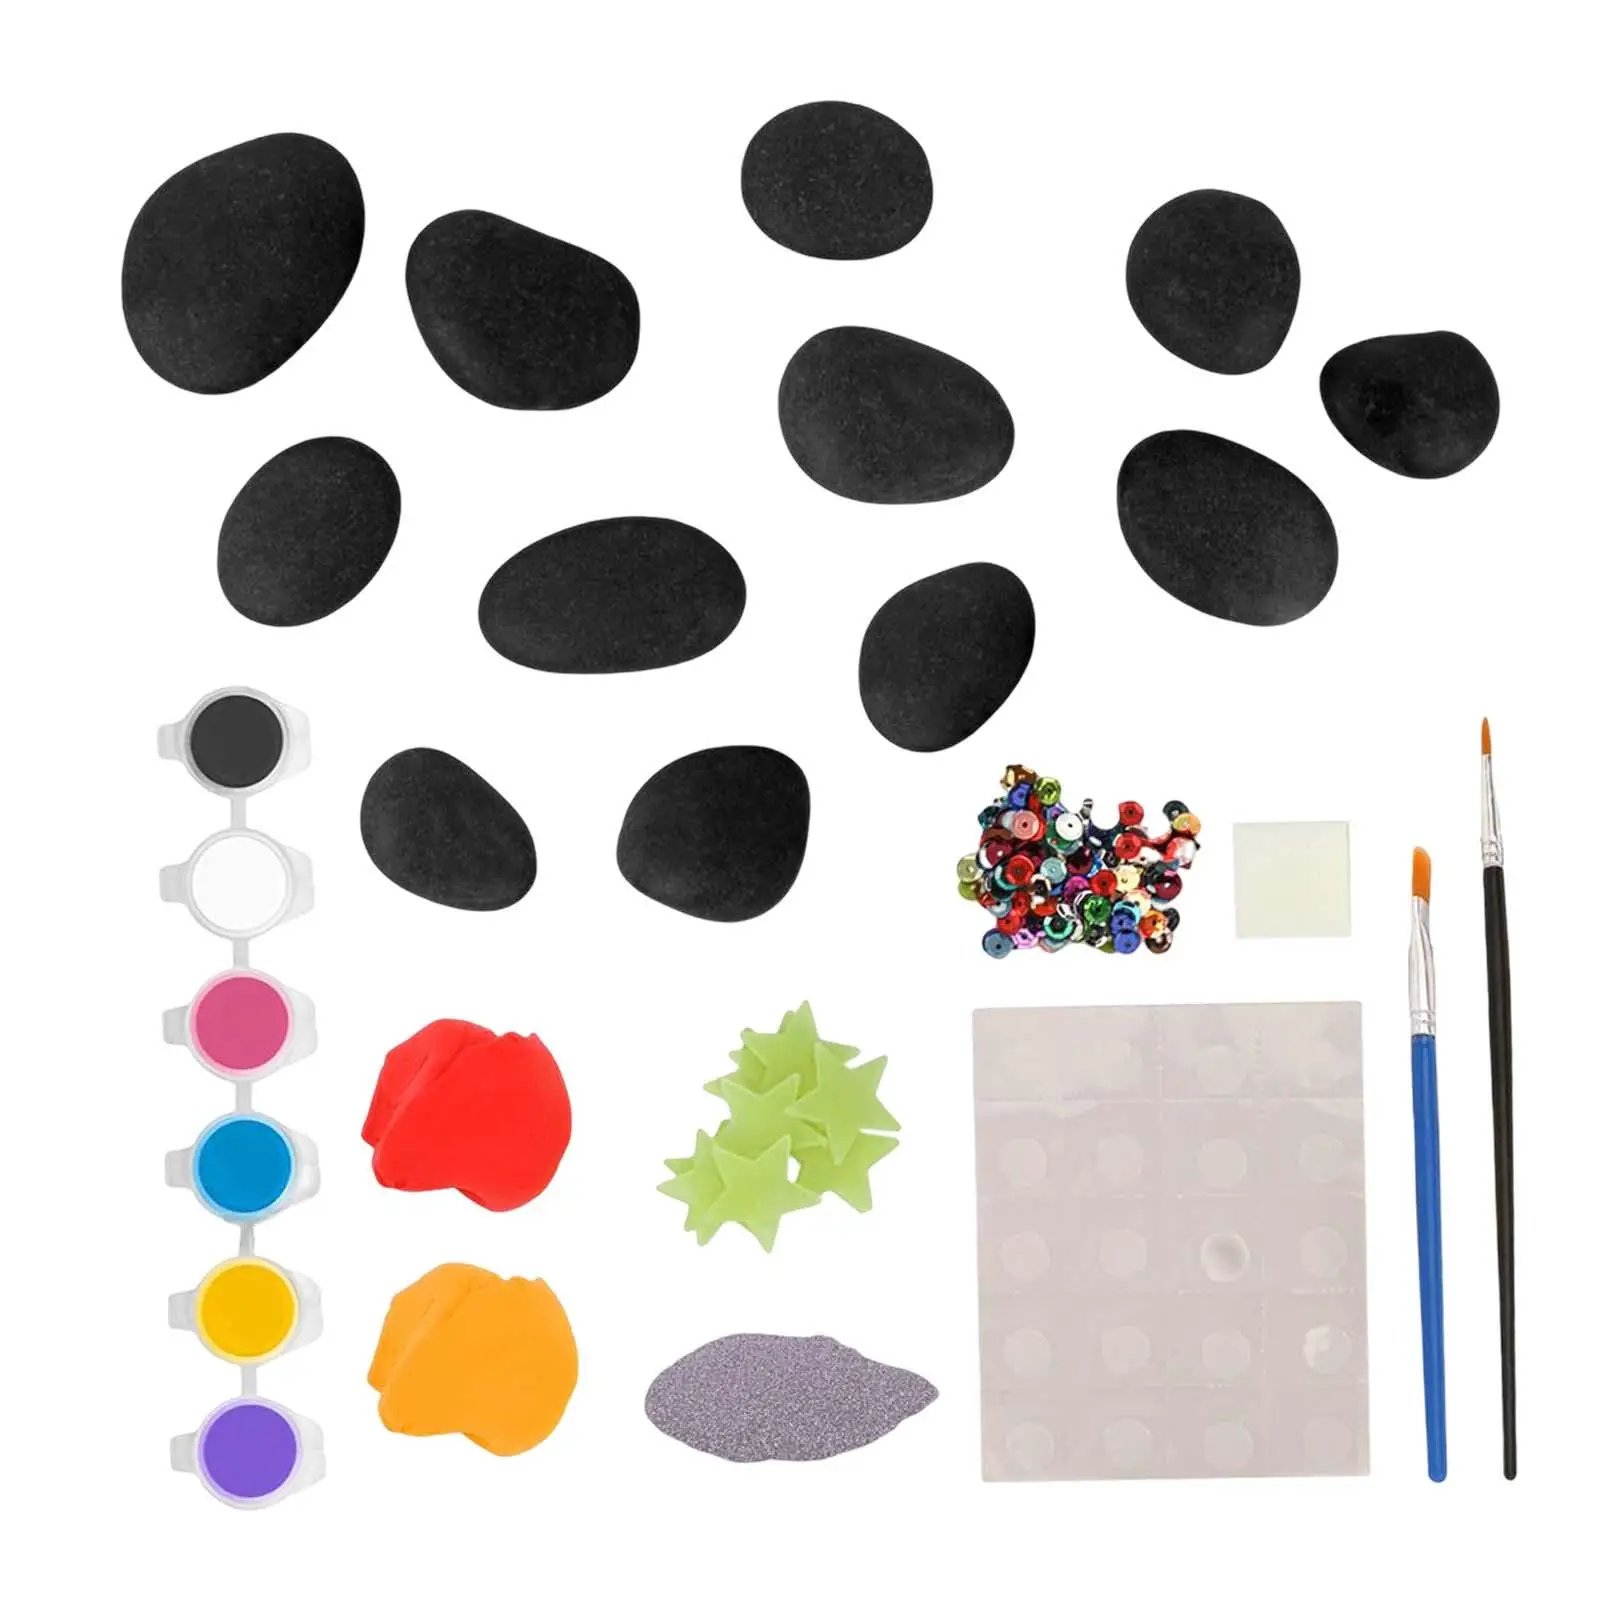 Rock Painting Outdoor Activity Kit Waterproof Arts and Crafts art Painting Set for Outdoor Birthday Girl